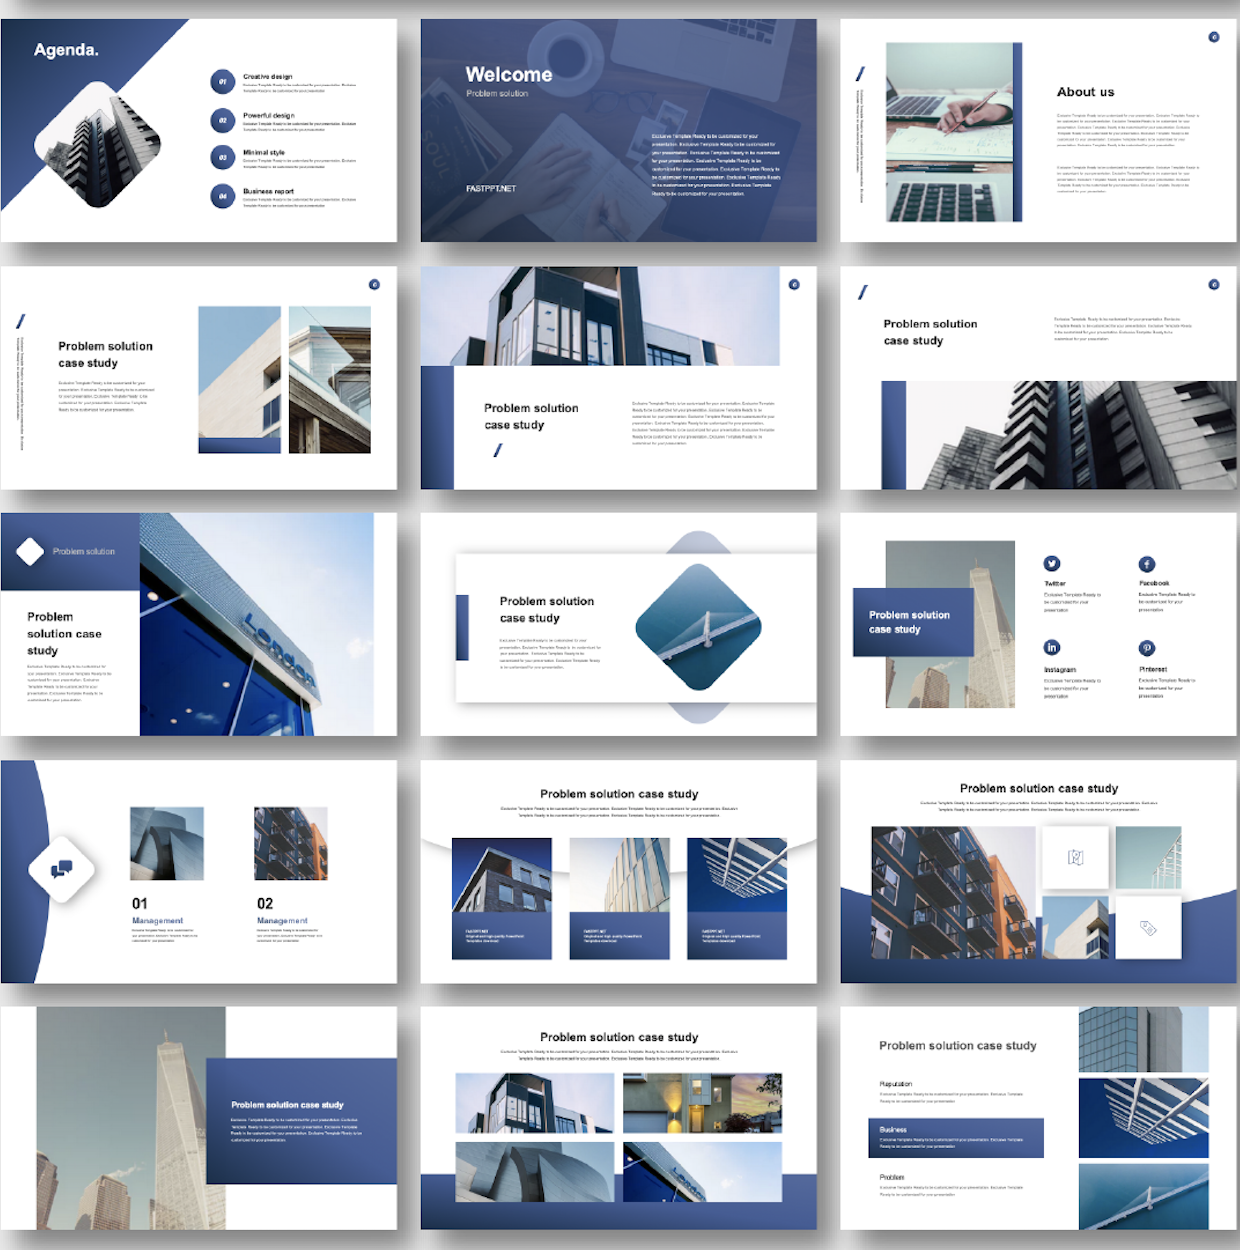 ppt templates free download business presentation